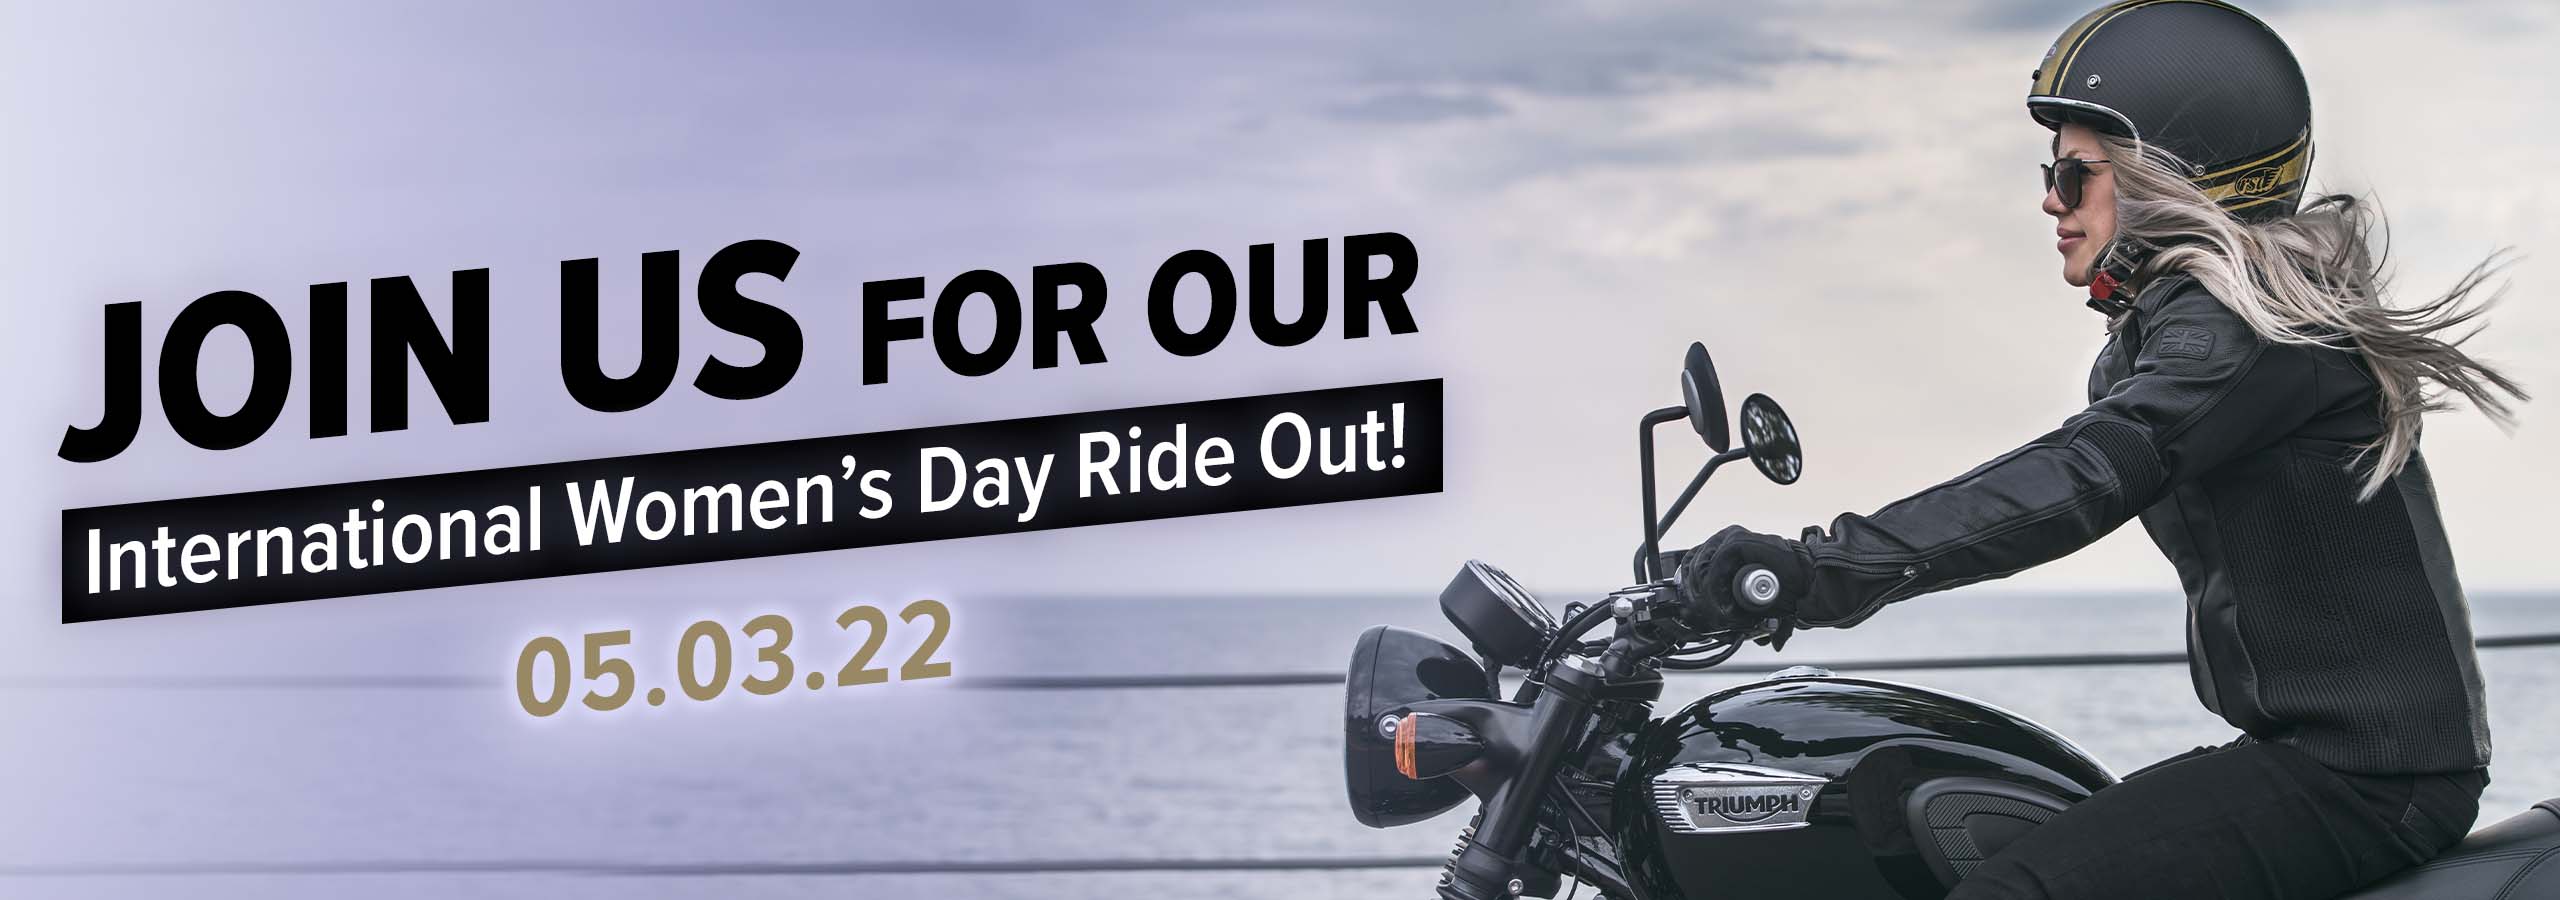 Laguna Group International Women's Day ride out on Saturday the 5th of March 2022